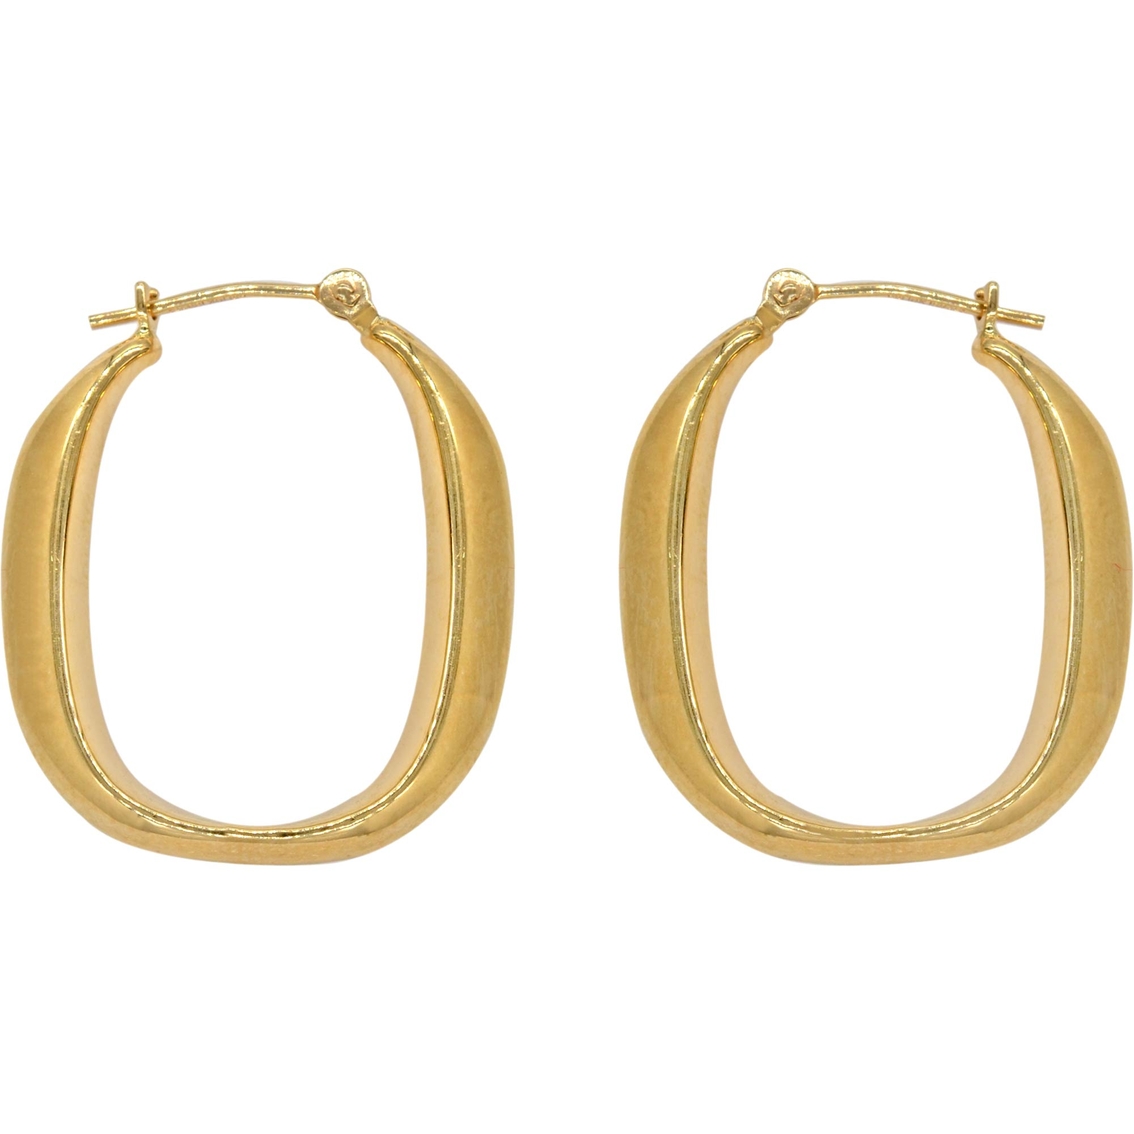 14k Yellow Gold Elongated Hoops | Gold Earrings | Jewelry & Watches ...